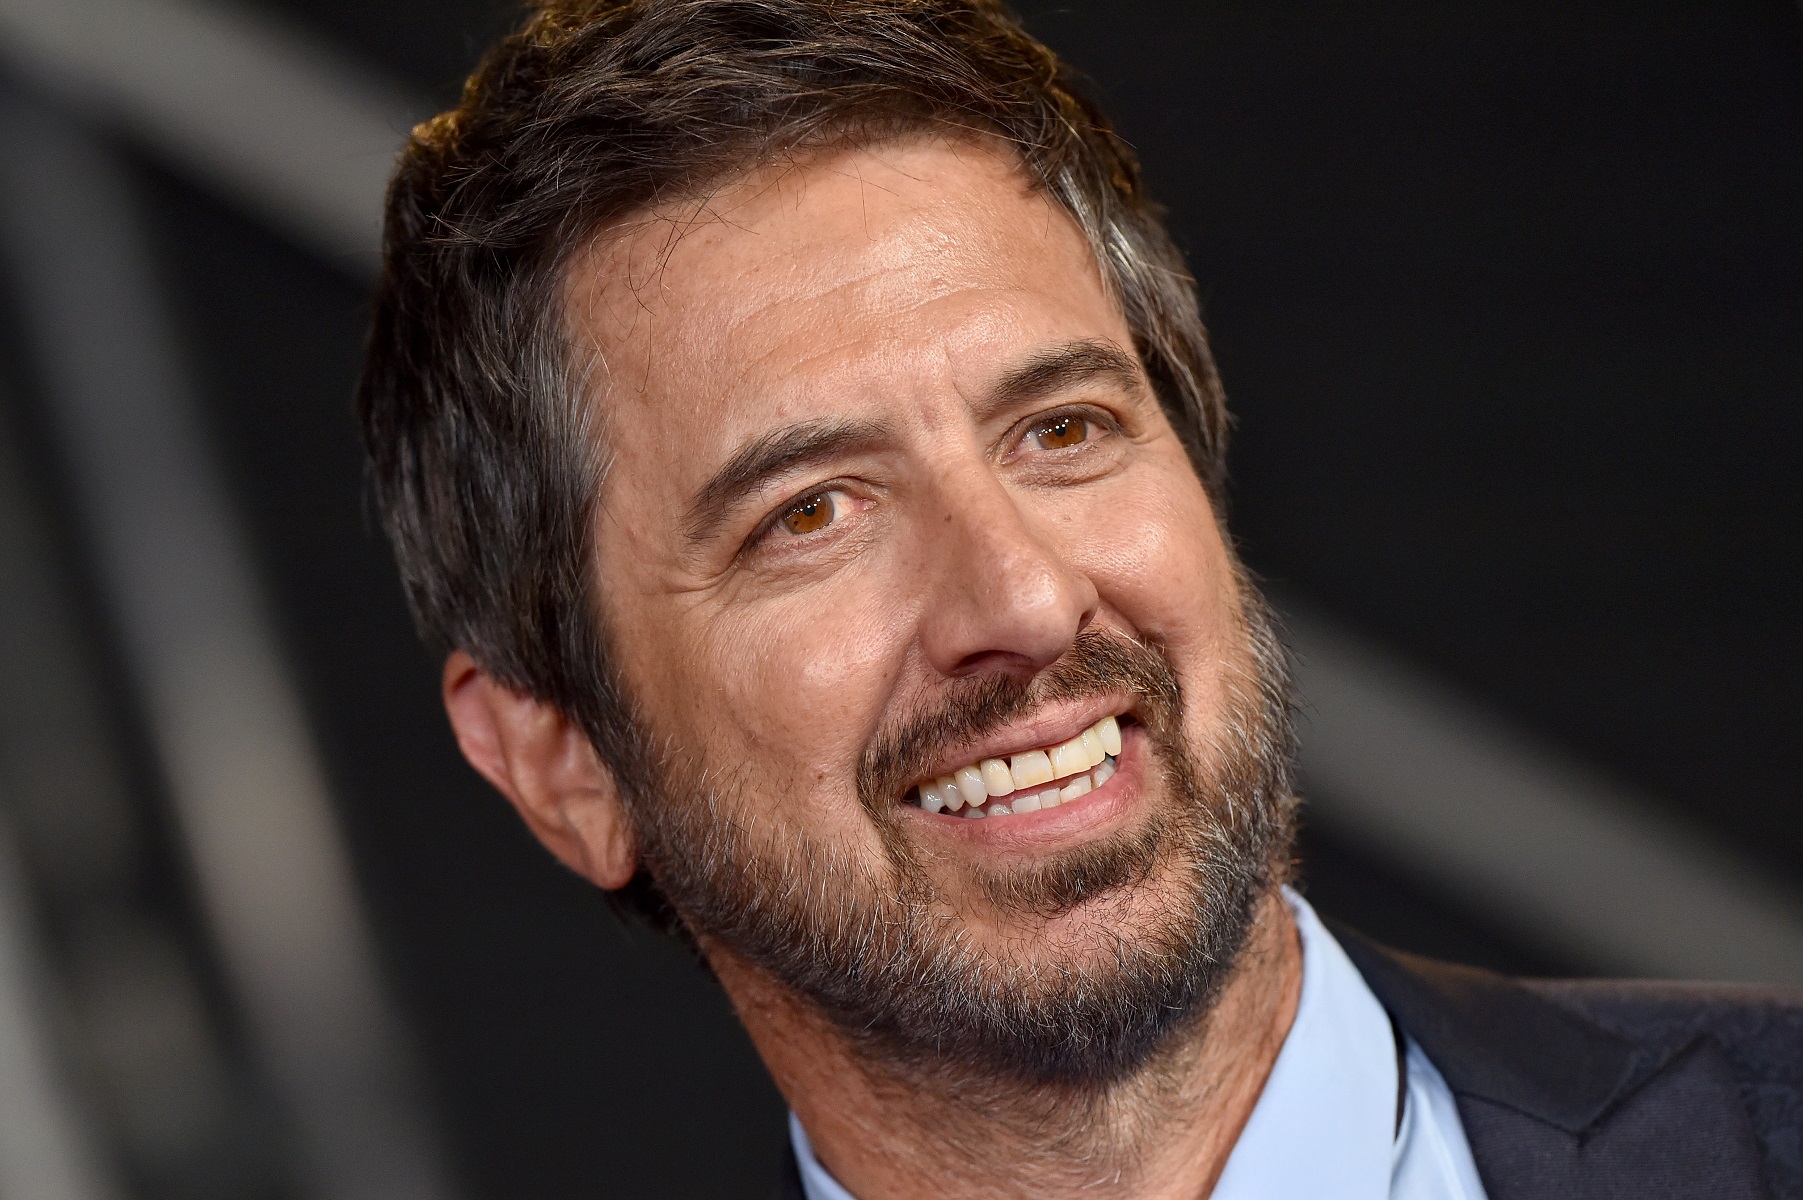 Ray Romano attends the Premiere of Netflix's "The Irishman" at TCL Chinese Theatre on October 24, 2019